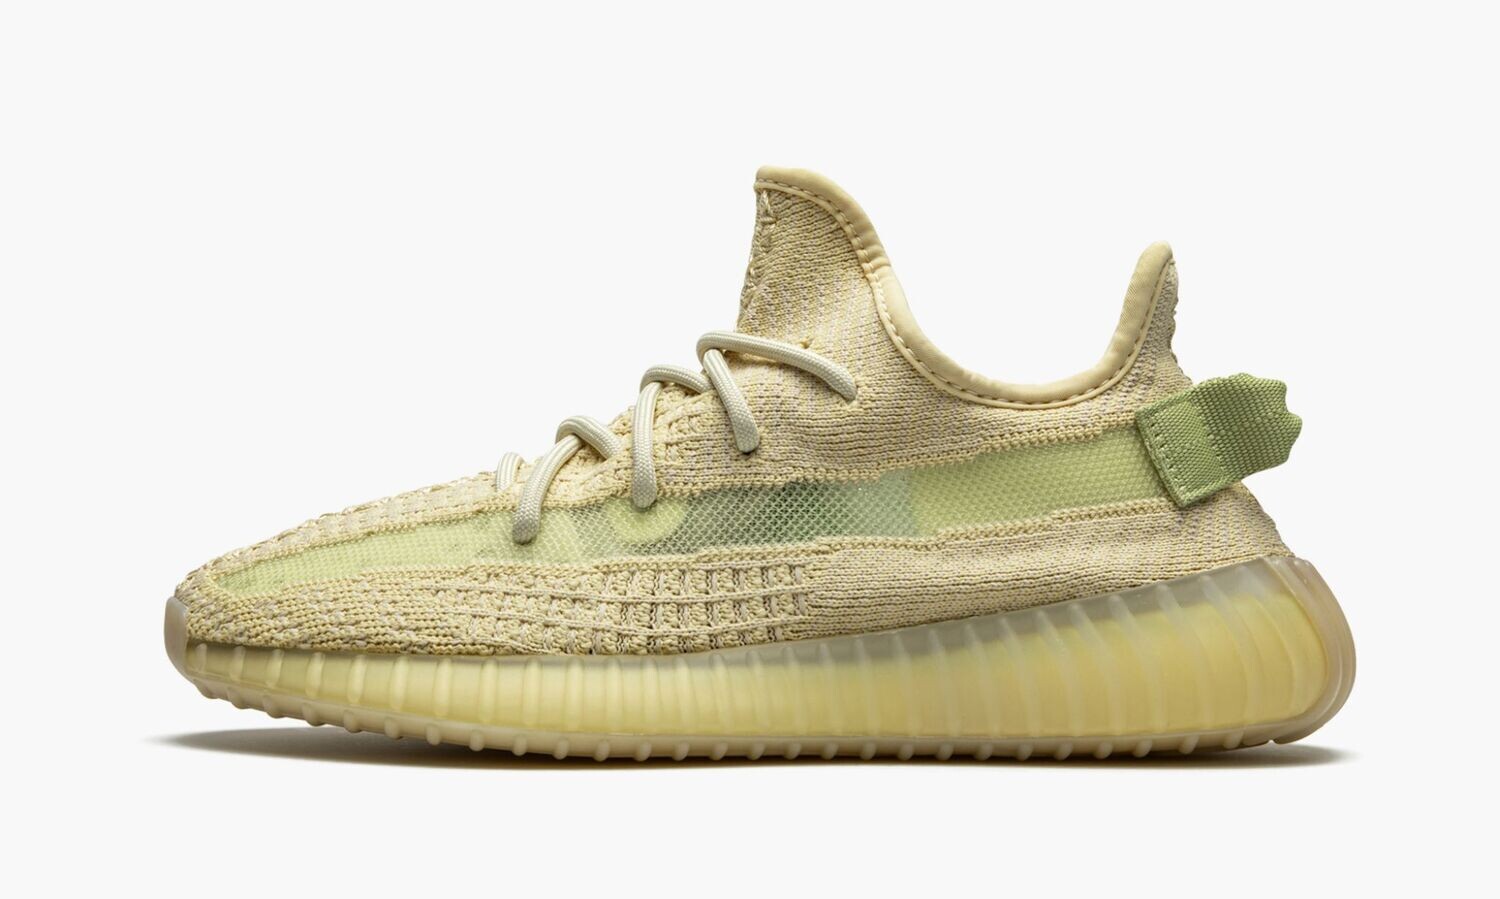 ADIDAS YEEZY
YEEZY BOOST 350 V2
&quot;Flax&quot;